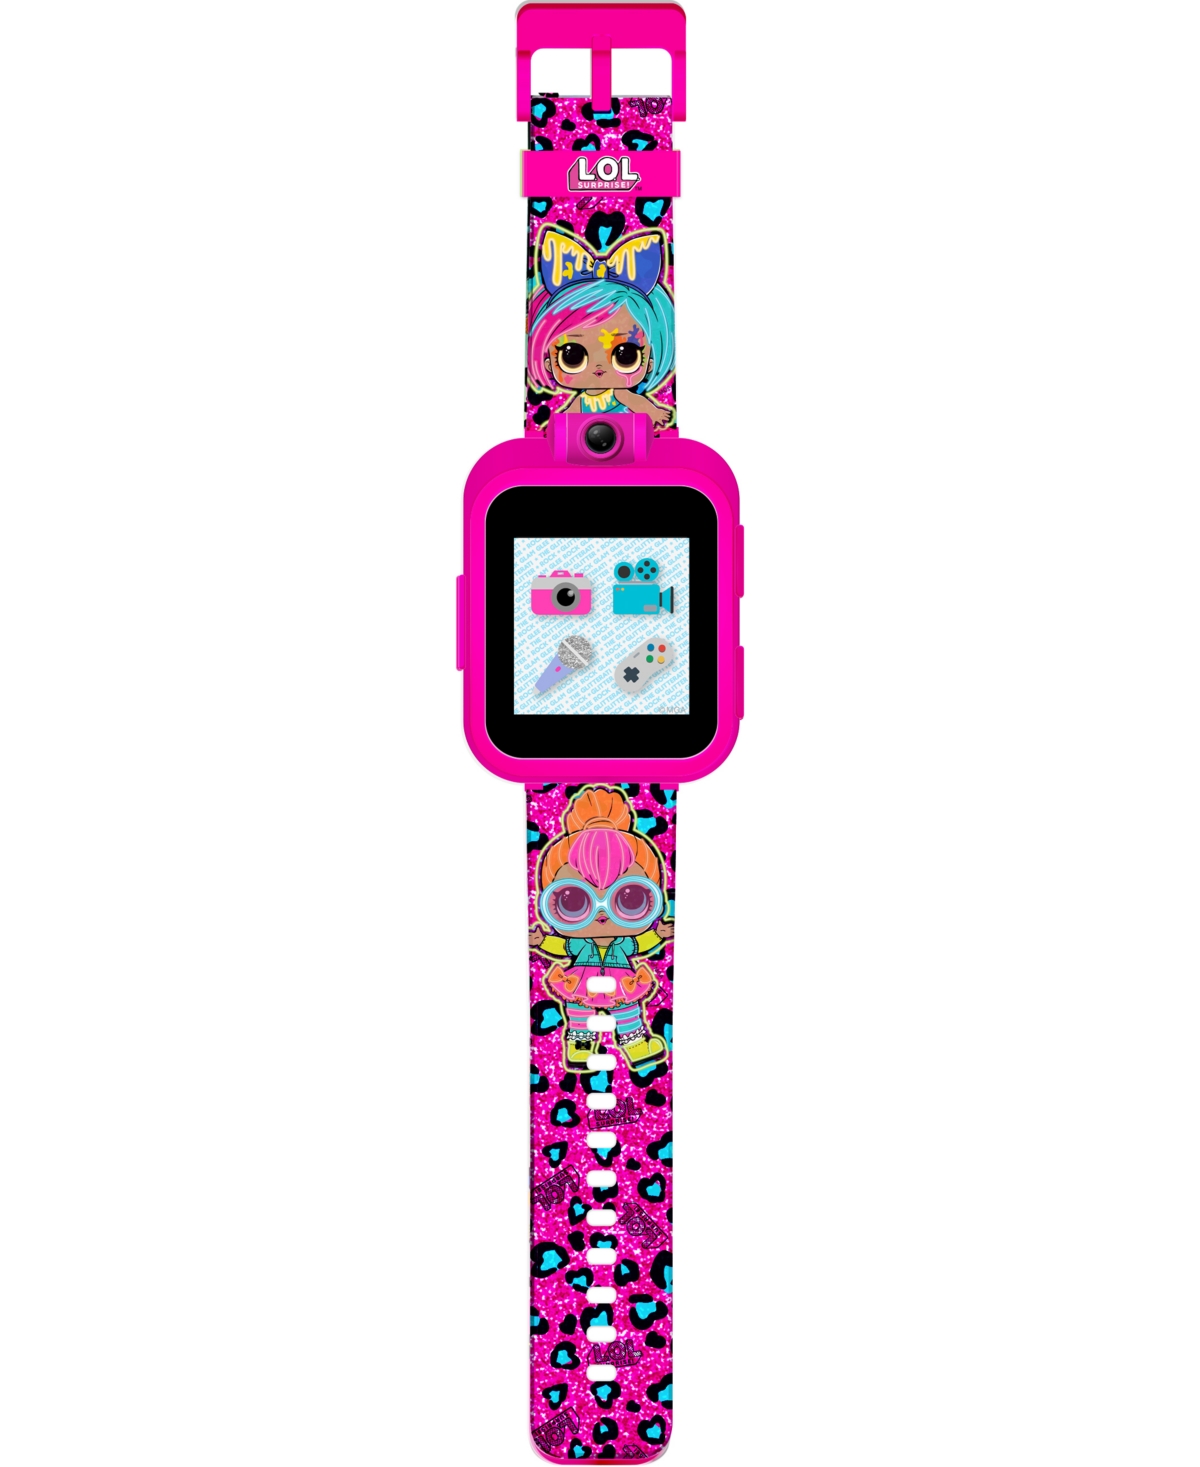 PLAYZOOM ITOUCH KID'S PLAYZOOM LOL PRINT RUBBER STRAP TOUCHSCREEN SMART WATCH 52MM X 42MM